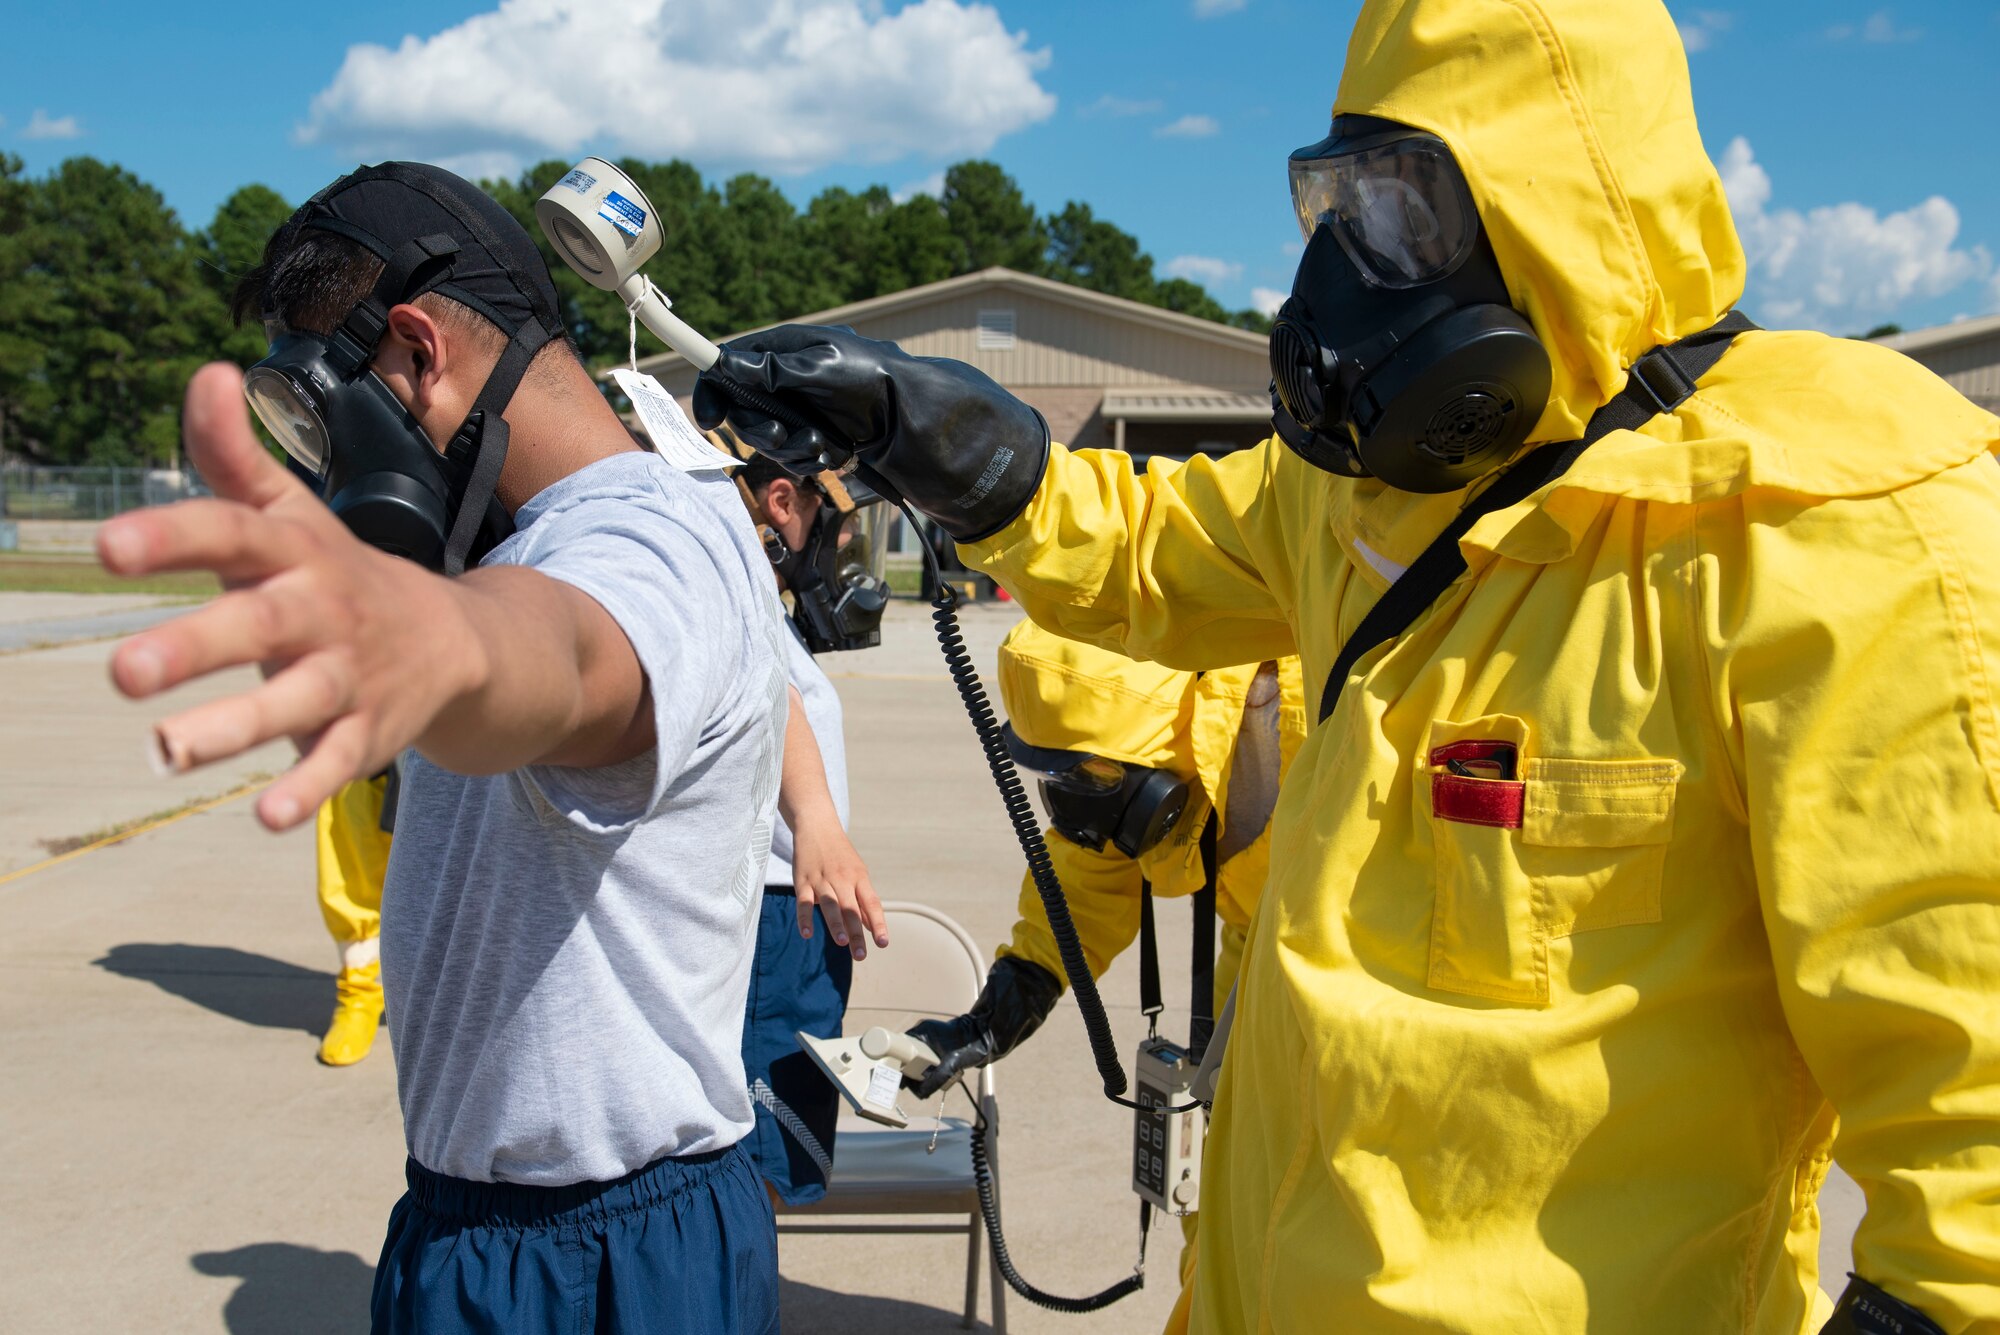 U.S. Airmen scan individuals going through a decontamination line for simulated radiation during a joint response training at Shaw Air Force Base, S.C., Aug. 29, 2018.